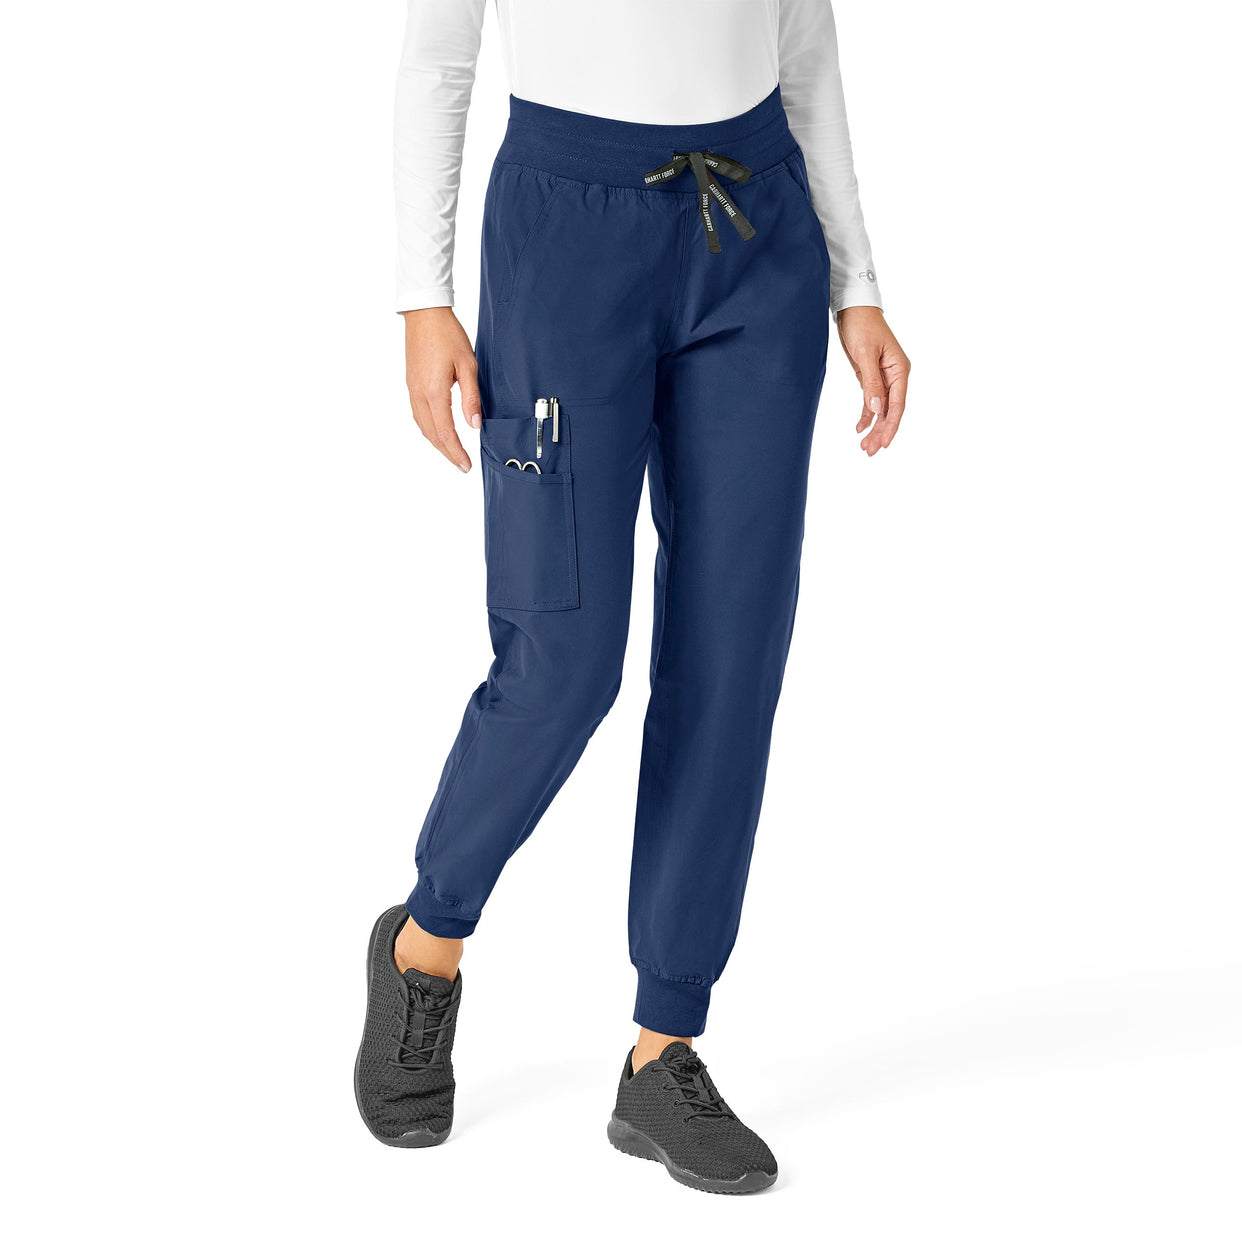 Force Essentials Women's Jogger Scrub Pant Navy side view